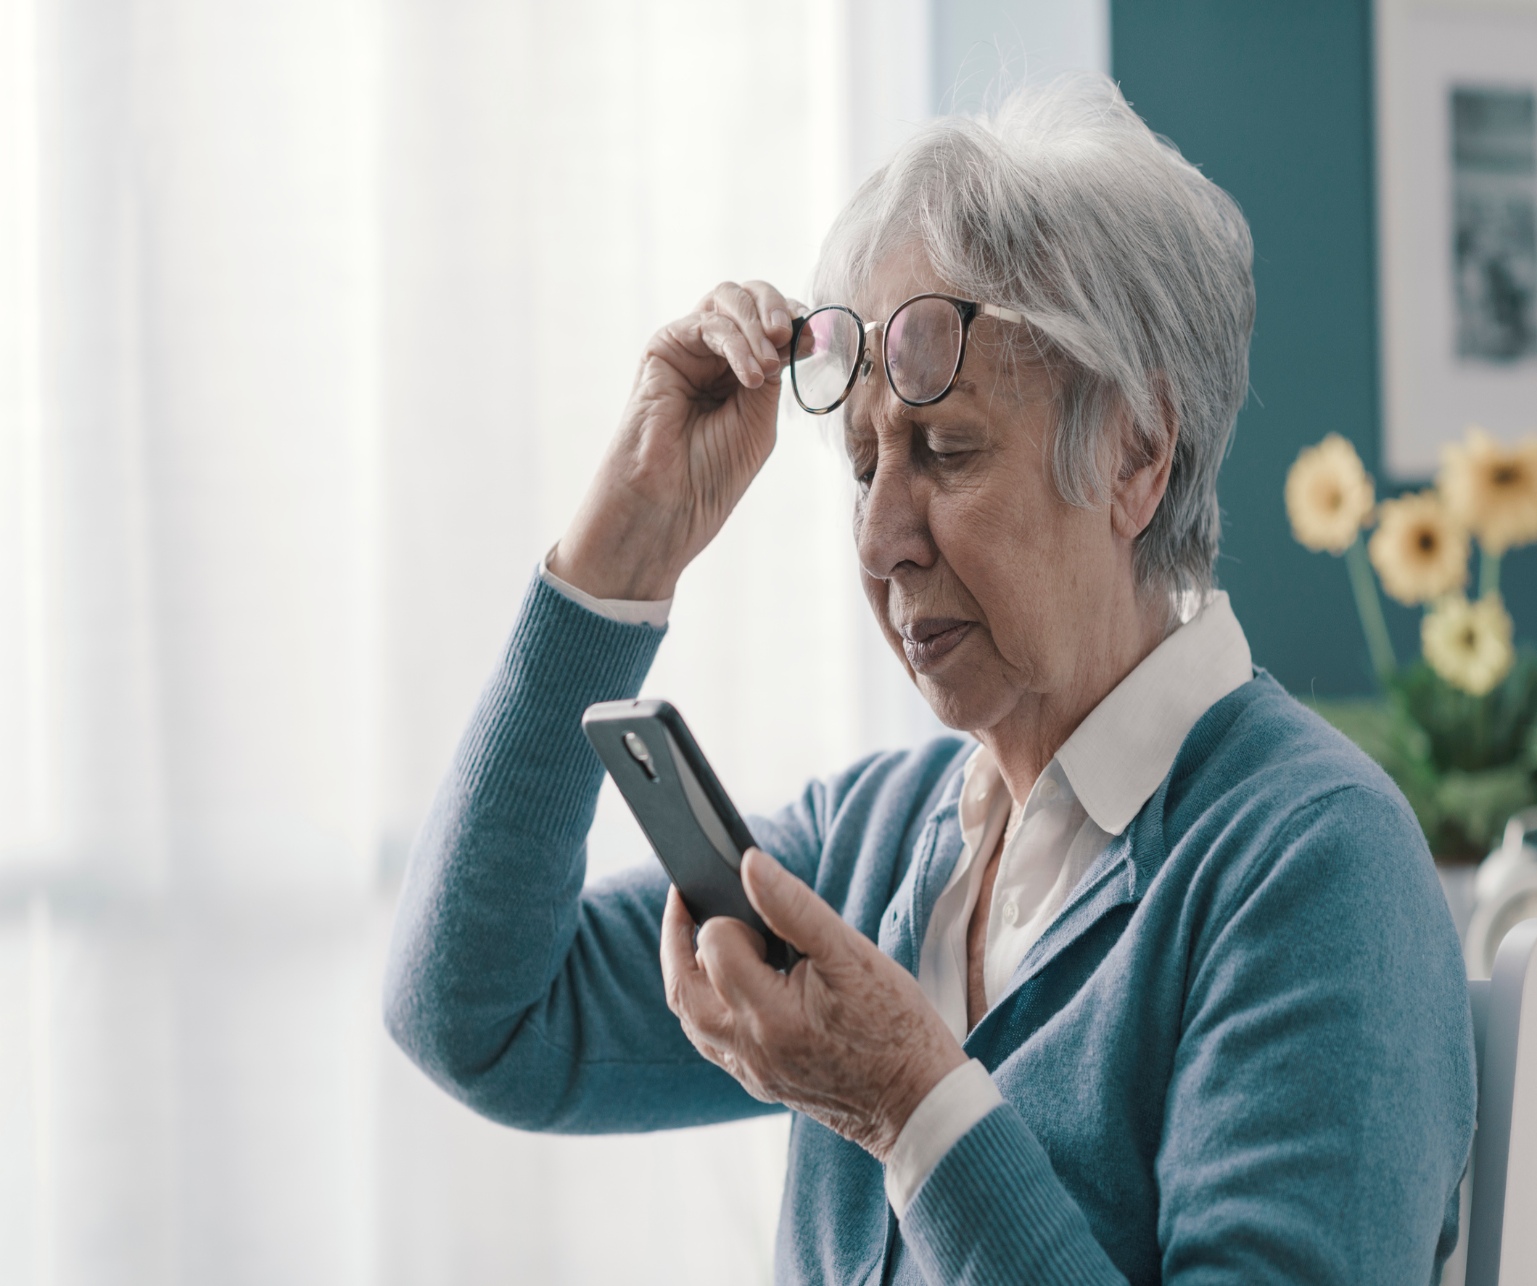 Elderly woman adjusting glasses to read smartphone, highlighting challenges with age-related vision problems.